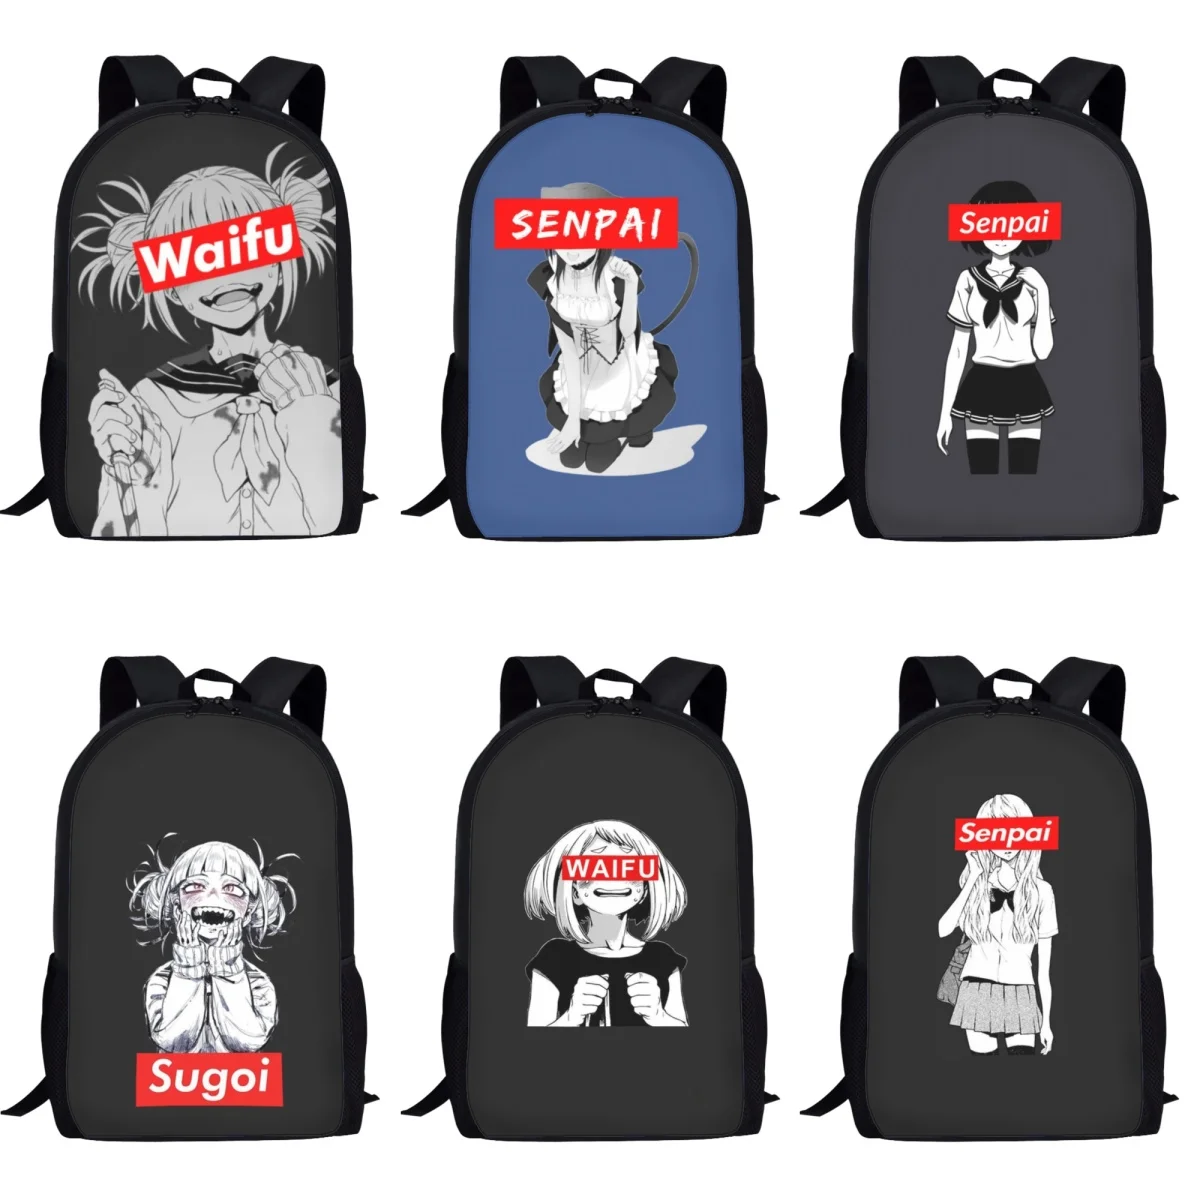 Sugoi Senpai Anime Waifu Back to School Middle School Bag Casual Daily Book Bags for Boys Large Capacity Kids Student Bagpack